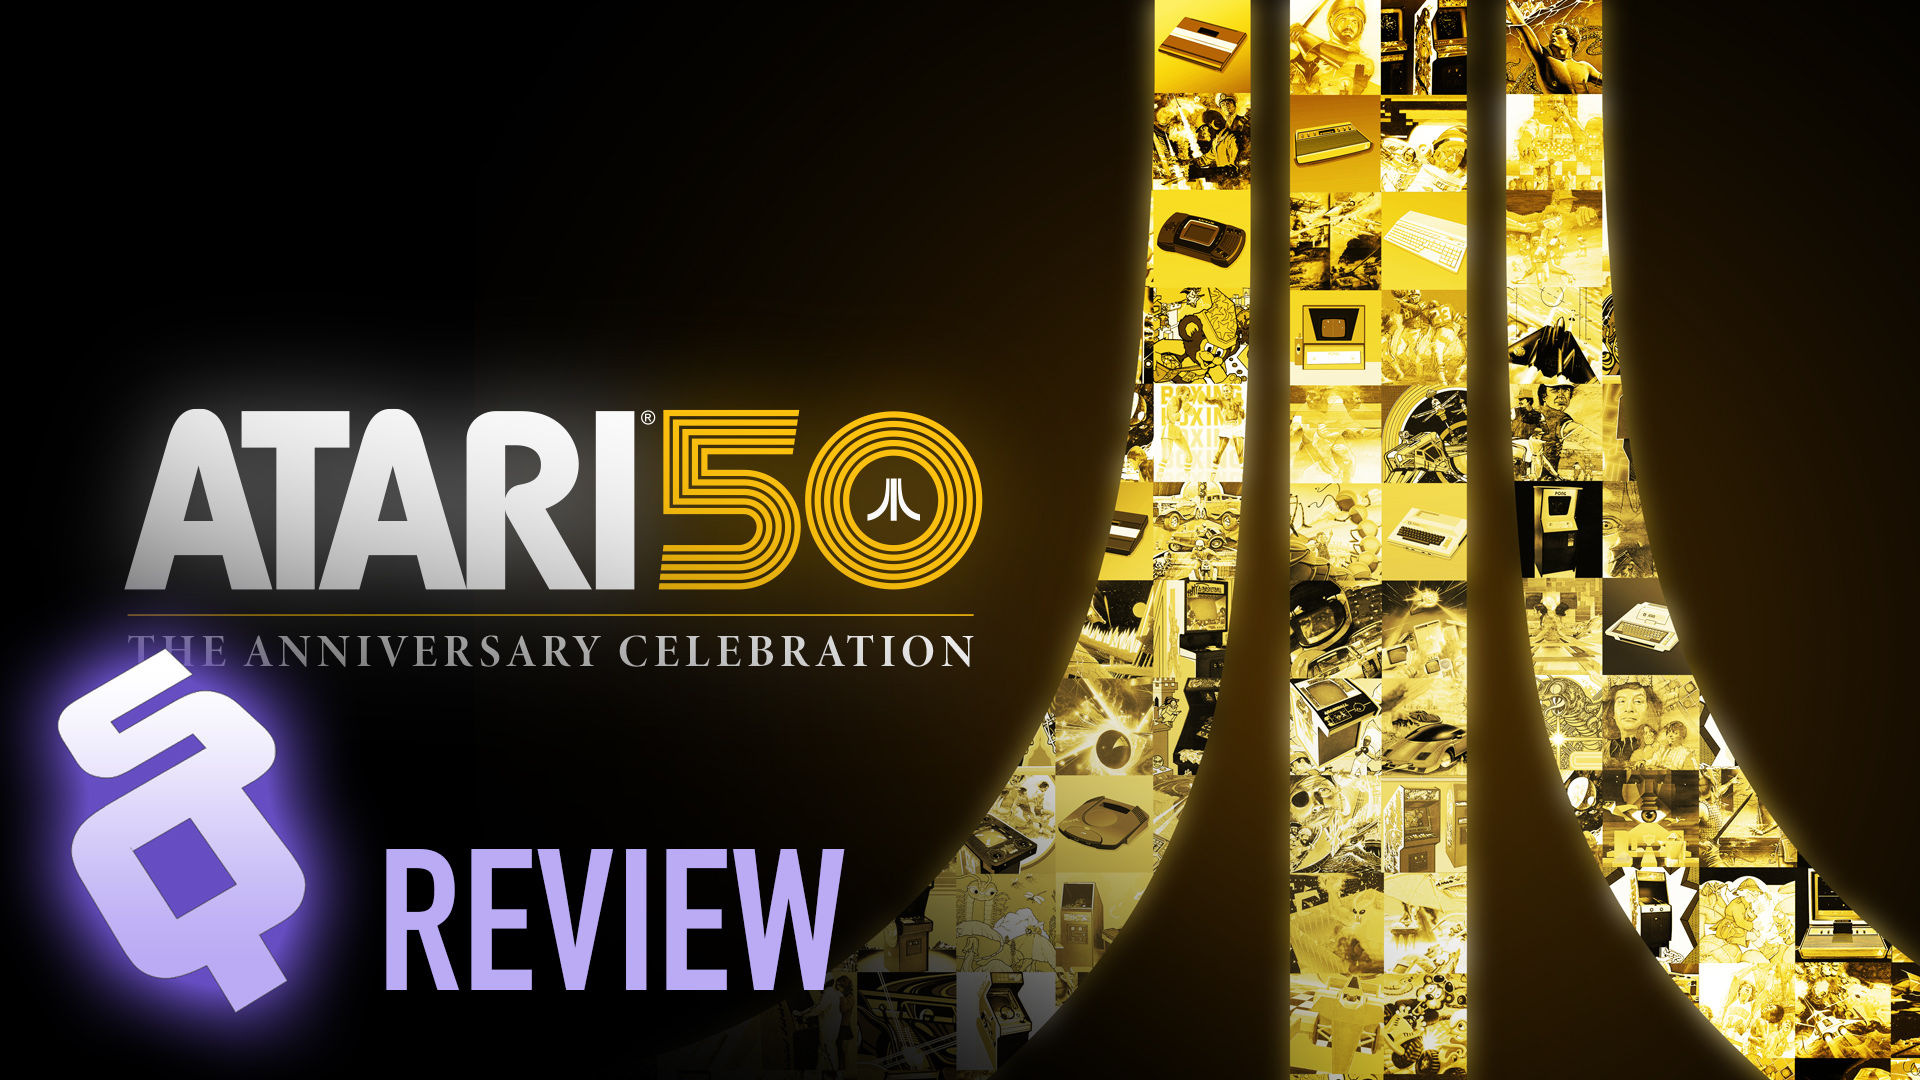 Atari 50: The Anniversary Collection review